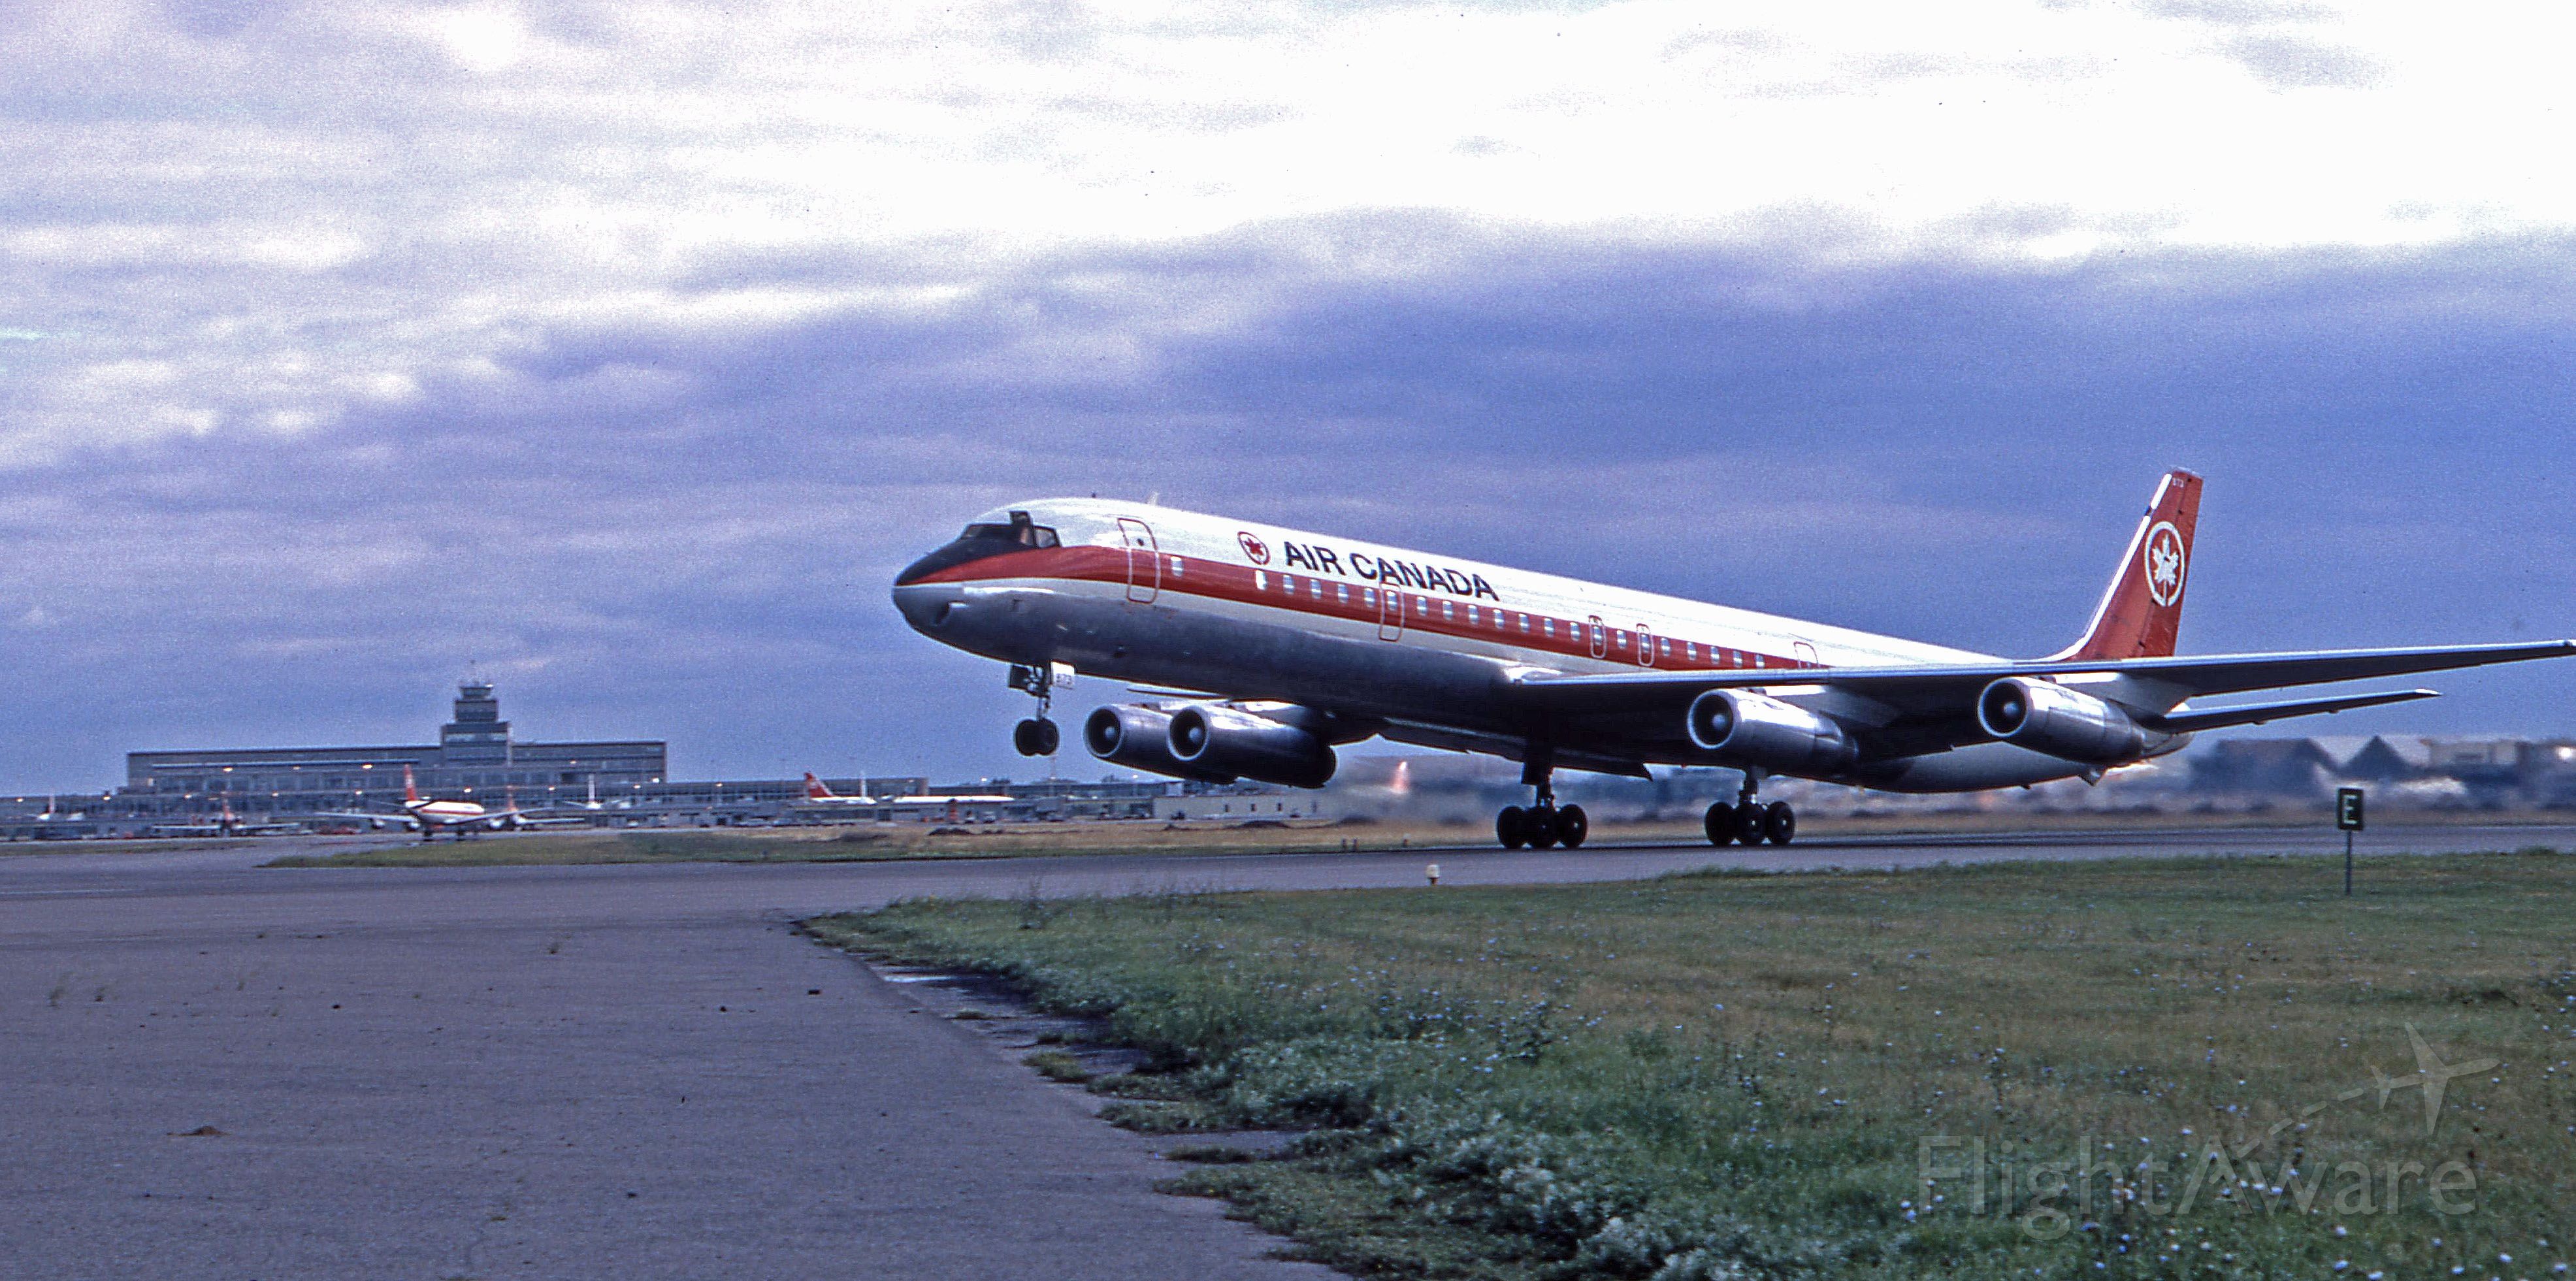 McDonnell Douglas DC-8-60 (C-FTIQ) - August 1971 - "Rotate" - departure on rwy 06L at Dorval.